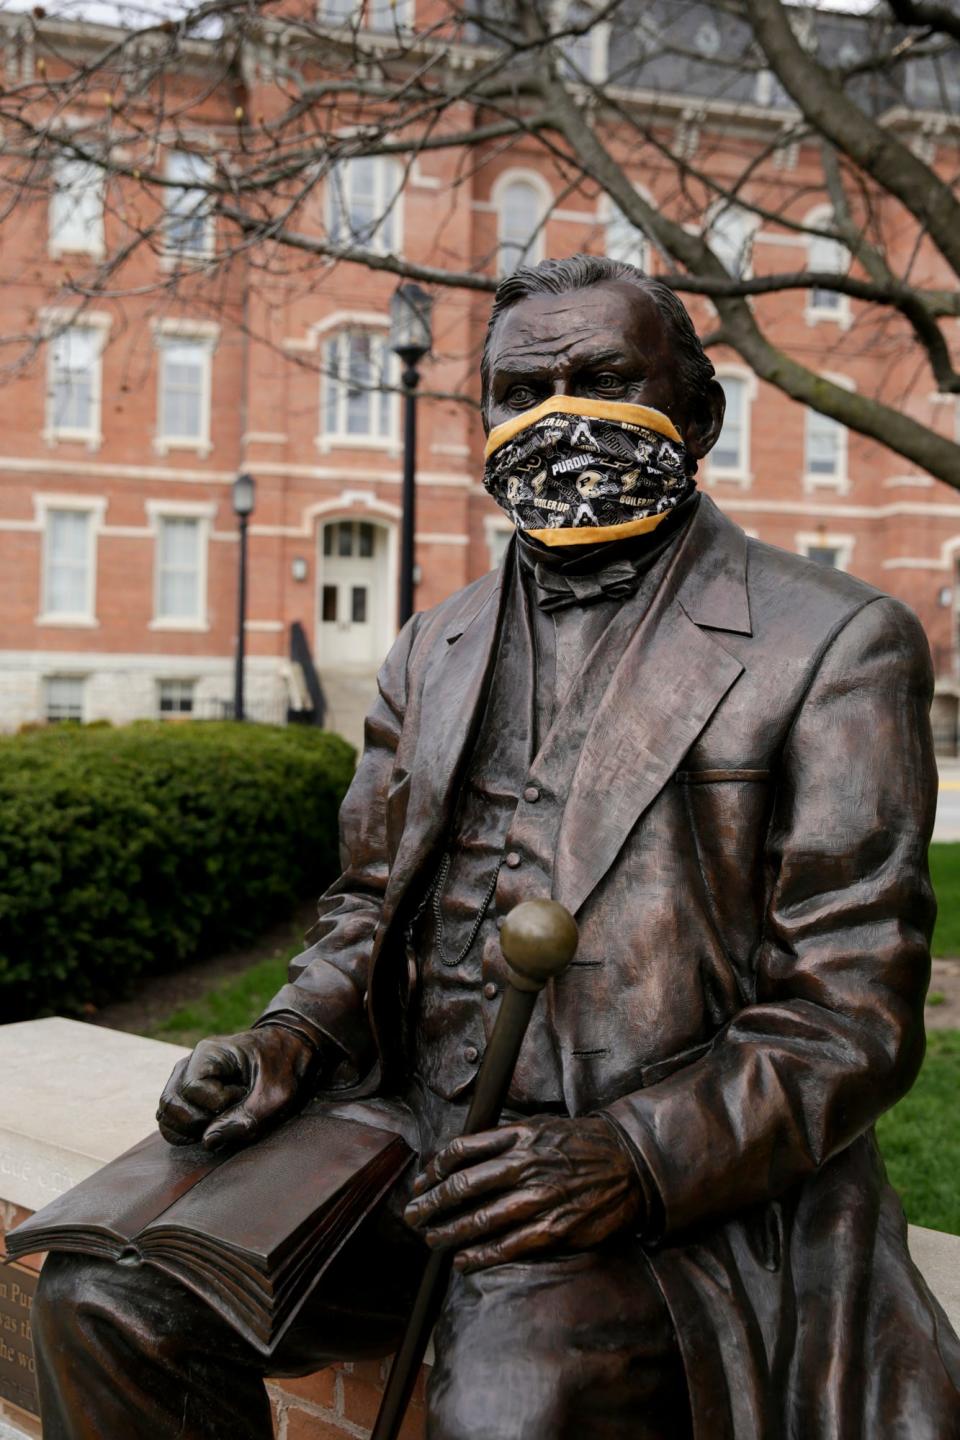 A statue of John Purdue, the founder of Purdue University, was wearing a mask on April 7 in West Lafayette, Indiana.